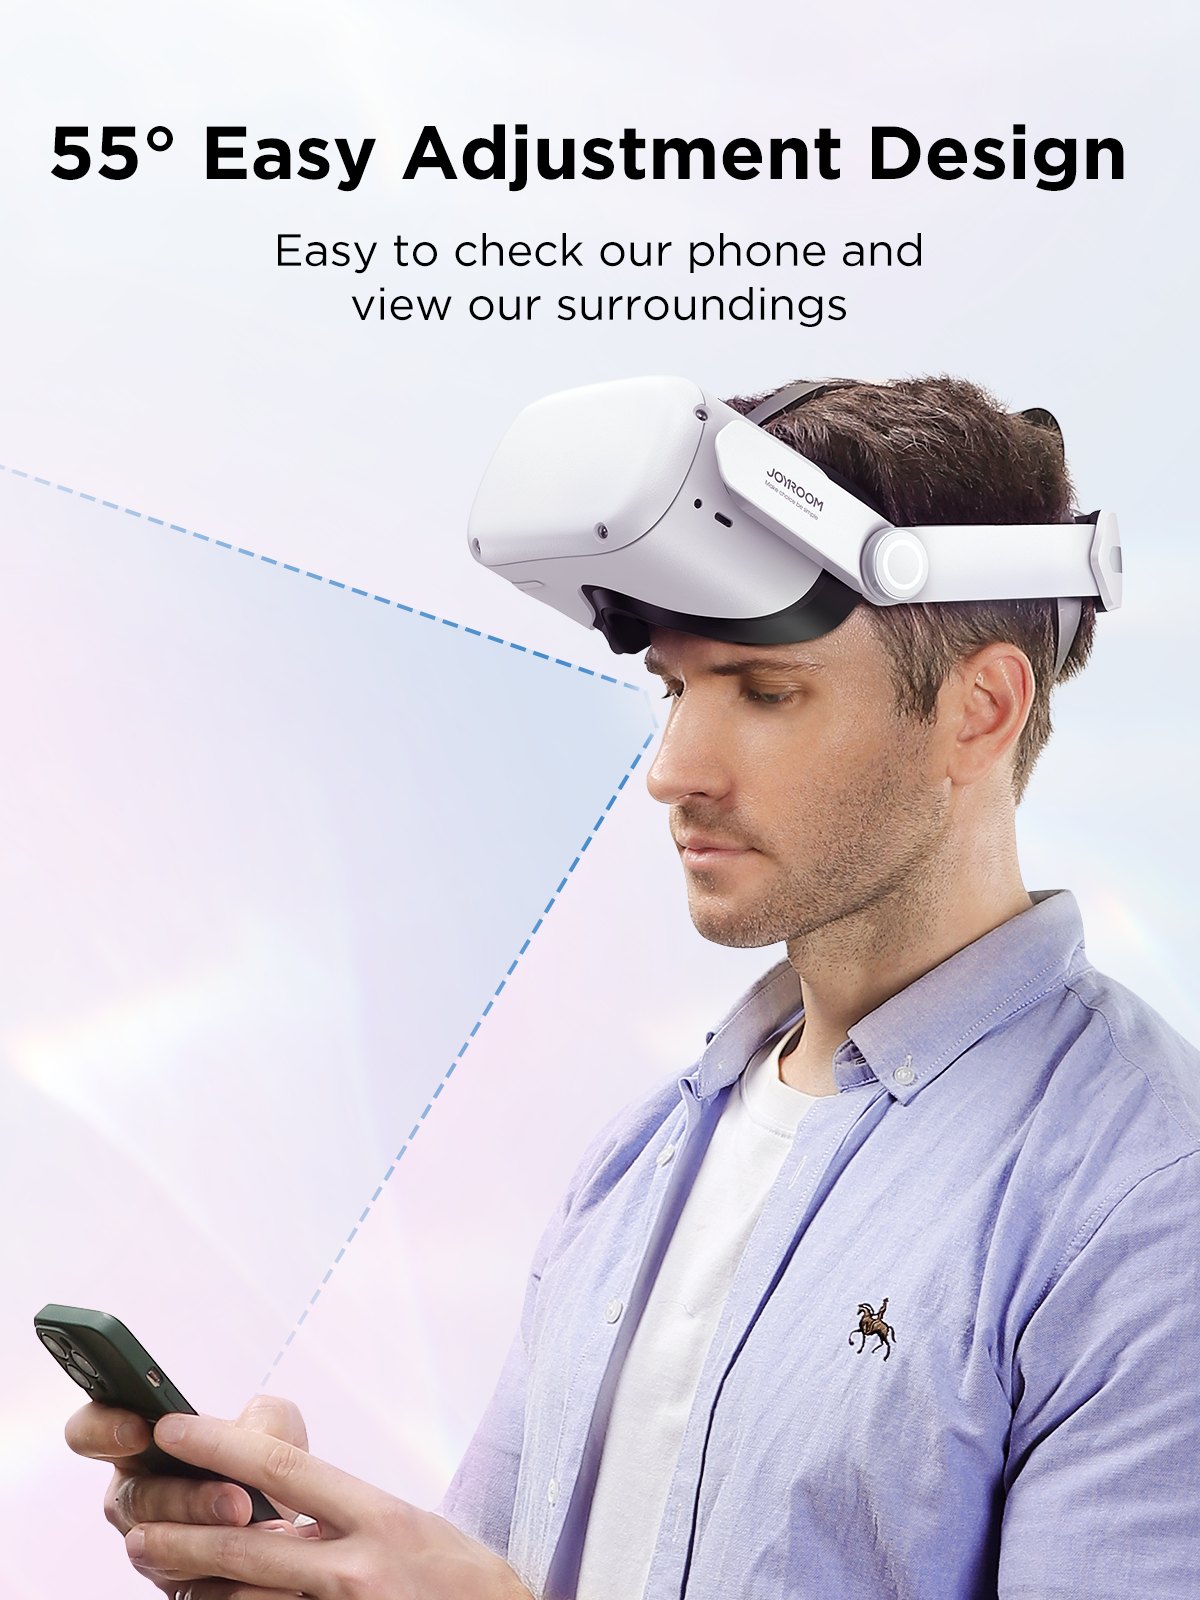 JOYROOM Head Strap Compatible with Oculus Quest 2,Replacement for Elite Strap,[Counter Balance & Reduce Facial Pressure] Lightweight and Adjustable Head Strap for Adults and Child